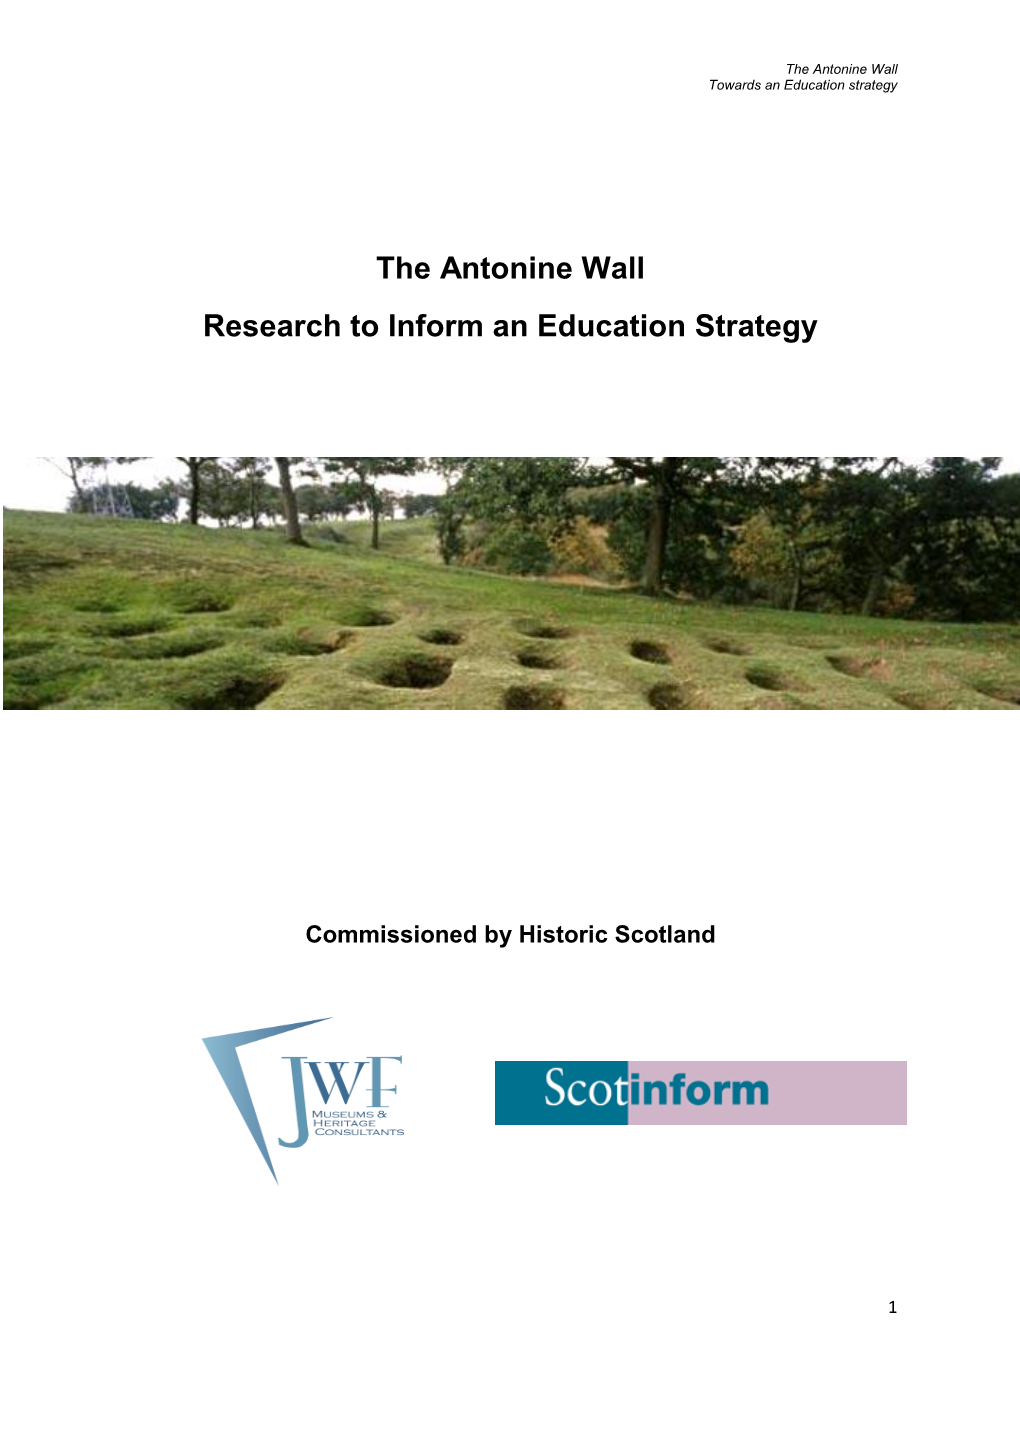 The Antonine Wall Research to Inform an Education Strategy